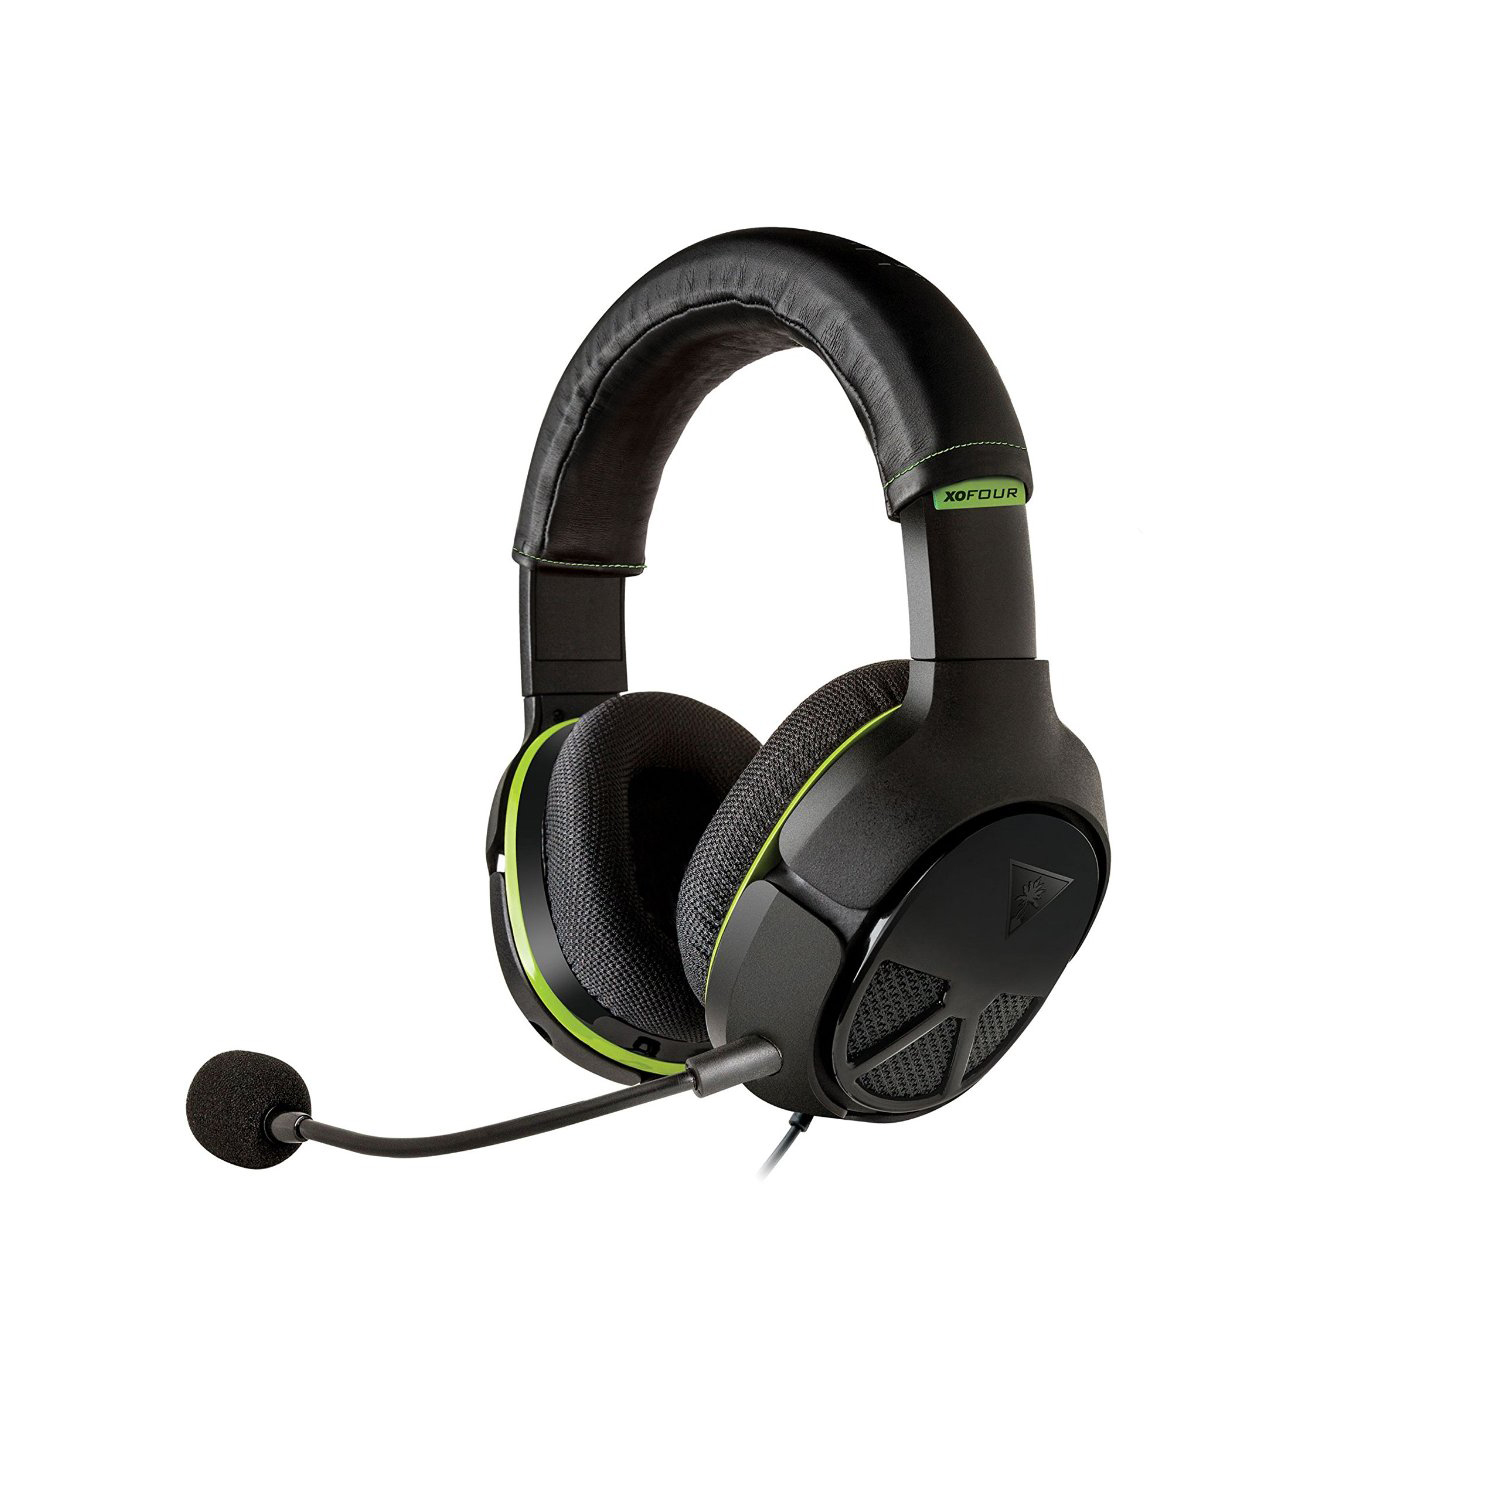 turtle beach montego ddl review